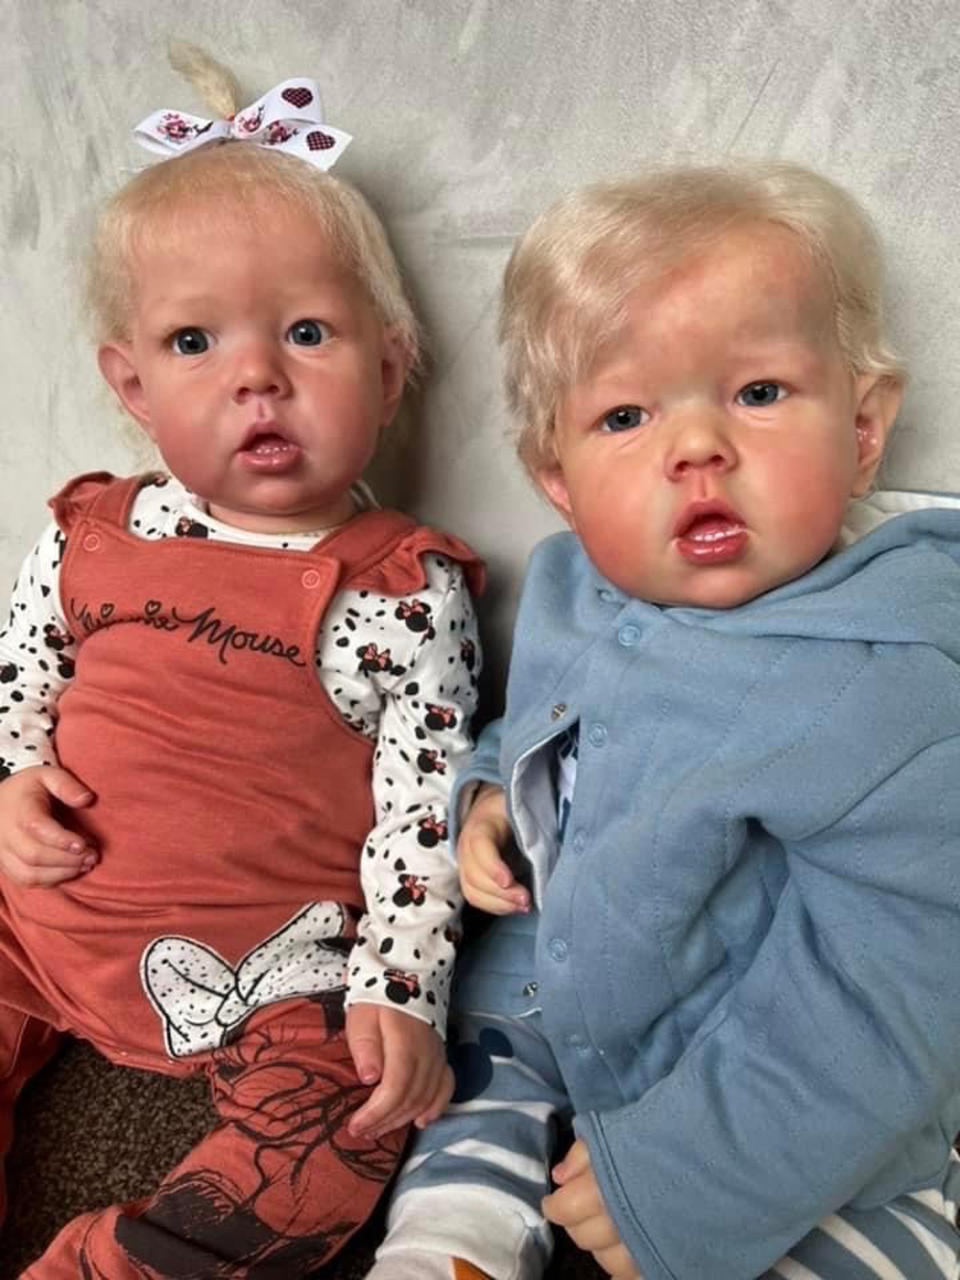 Reborn brother and sister Sammie and Scarlet (Collect/PA Real Life)